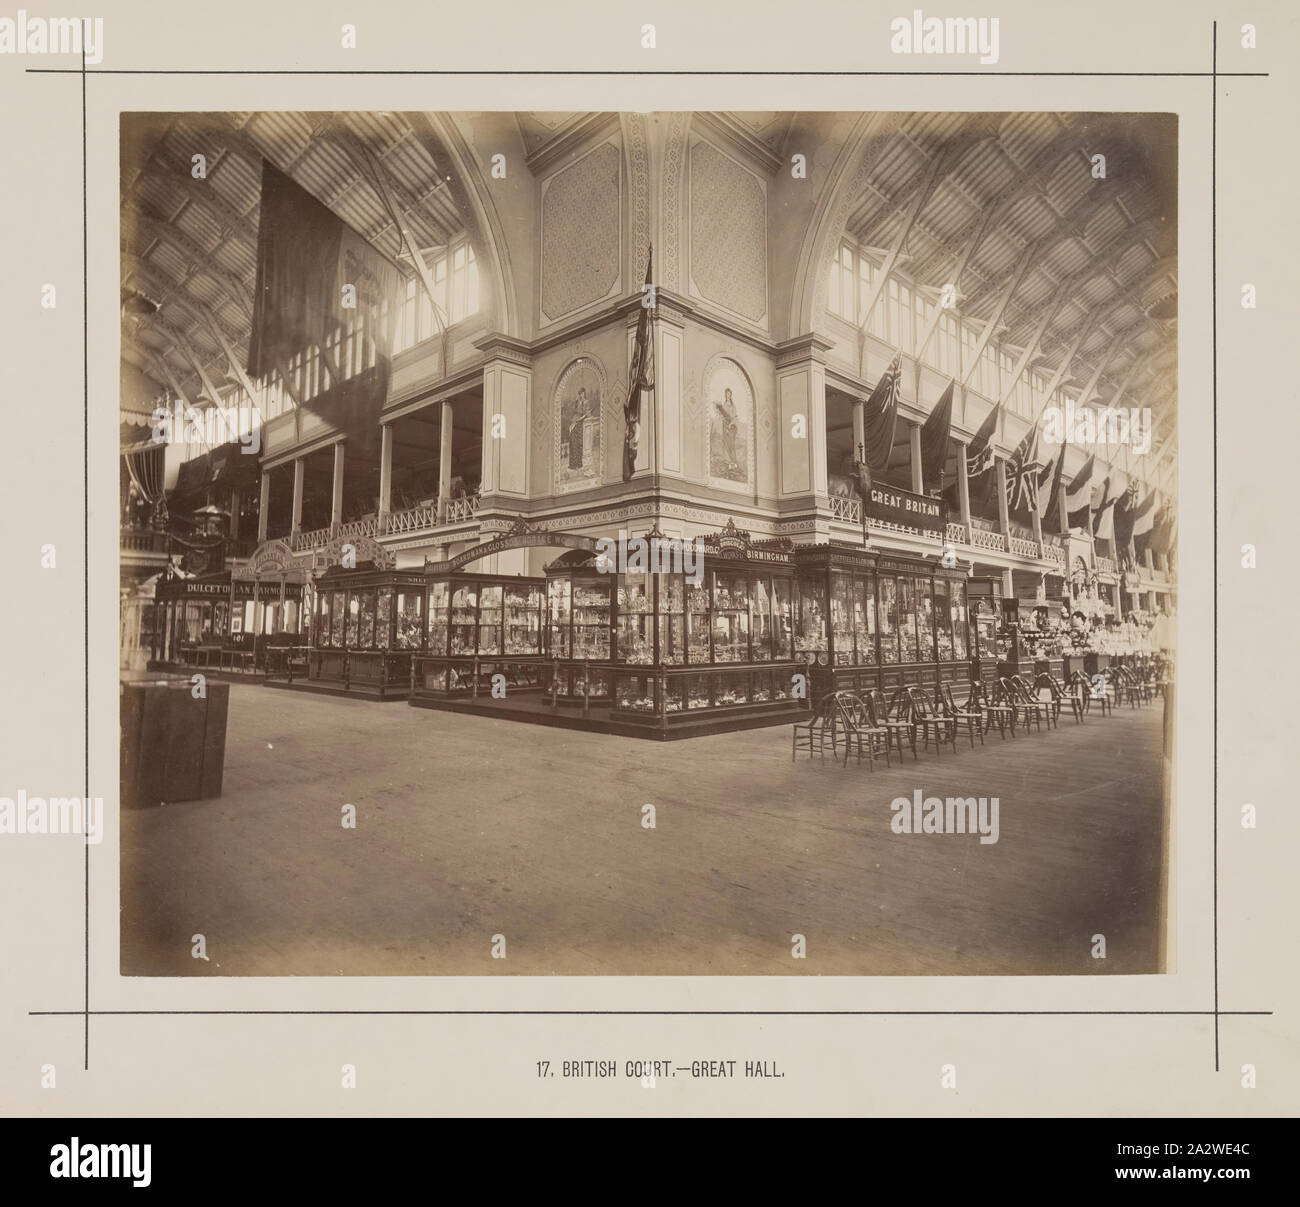 Photograph - British Court, Great Hall, Exhibition Building, 1880-1881, View of the north-eastern corner of the central transept, under the Great Dome, of the British Court in the Great Hall at the 1880 Melbourne International Exhibition held at the Exhibition Buildings, Carlton Gardens, between 1 October 1880 and 30 April 1881. In addition to the main permanent Exhibition Building, two permanent annexes as well as a large, central wooden temporary annexe was Stock Photo